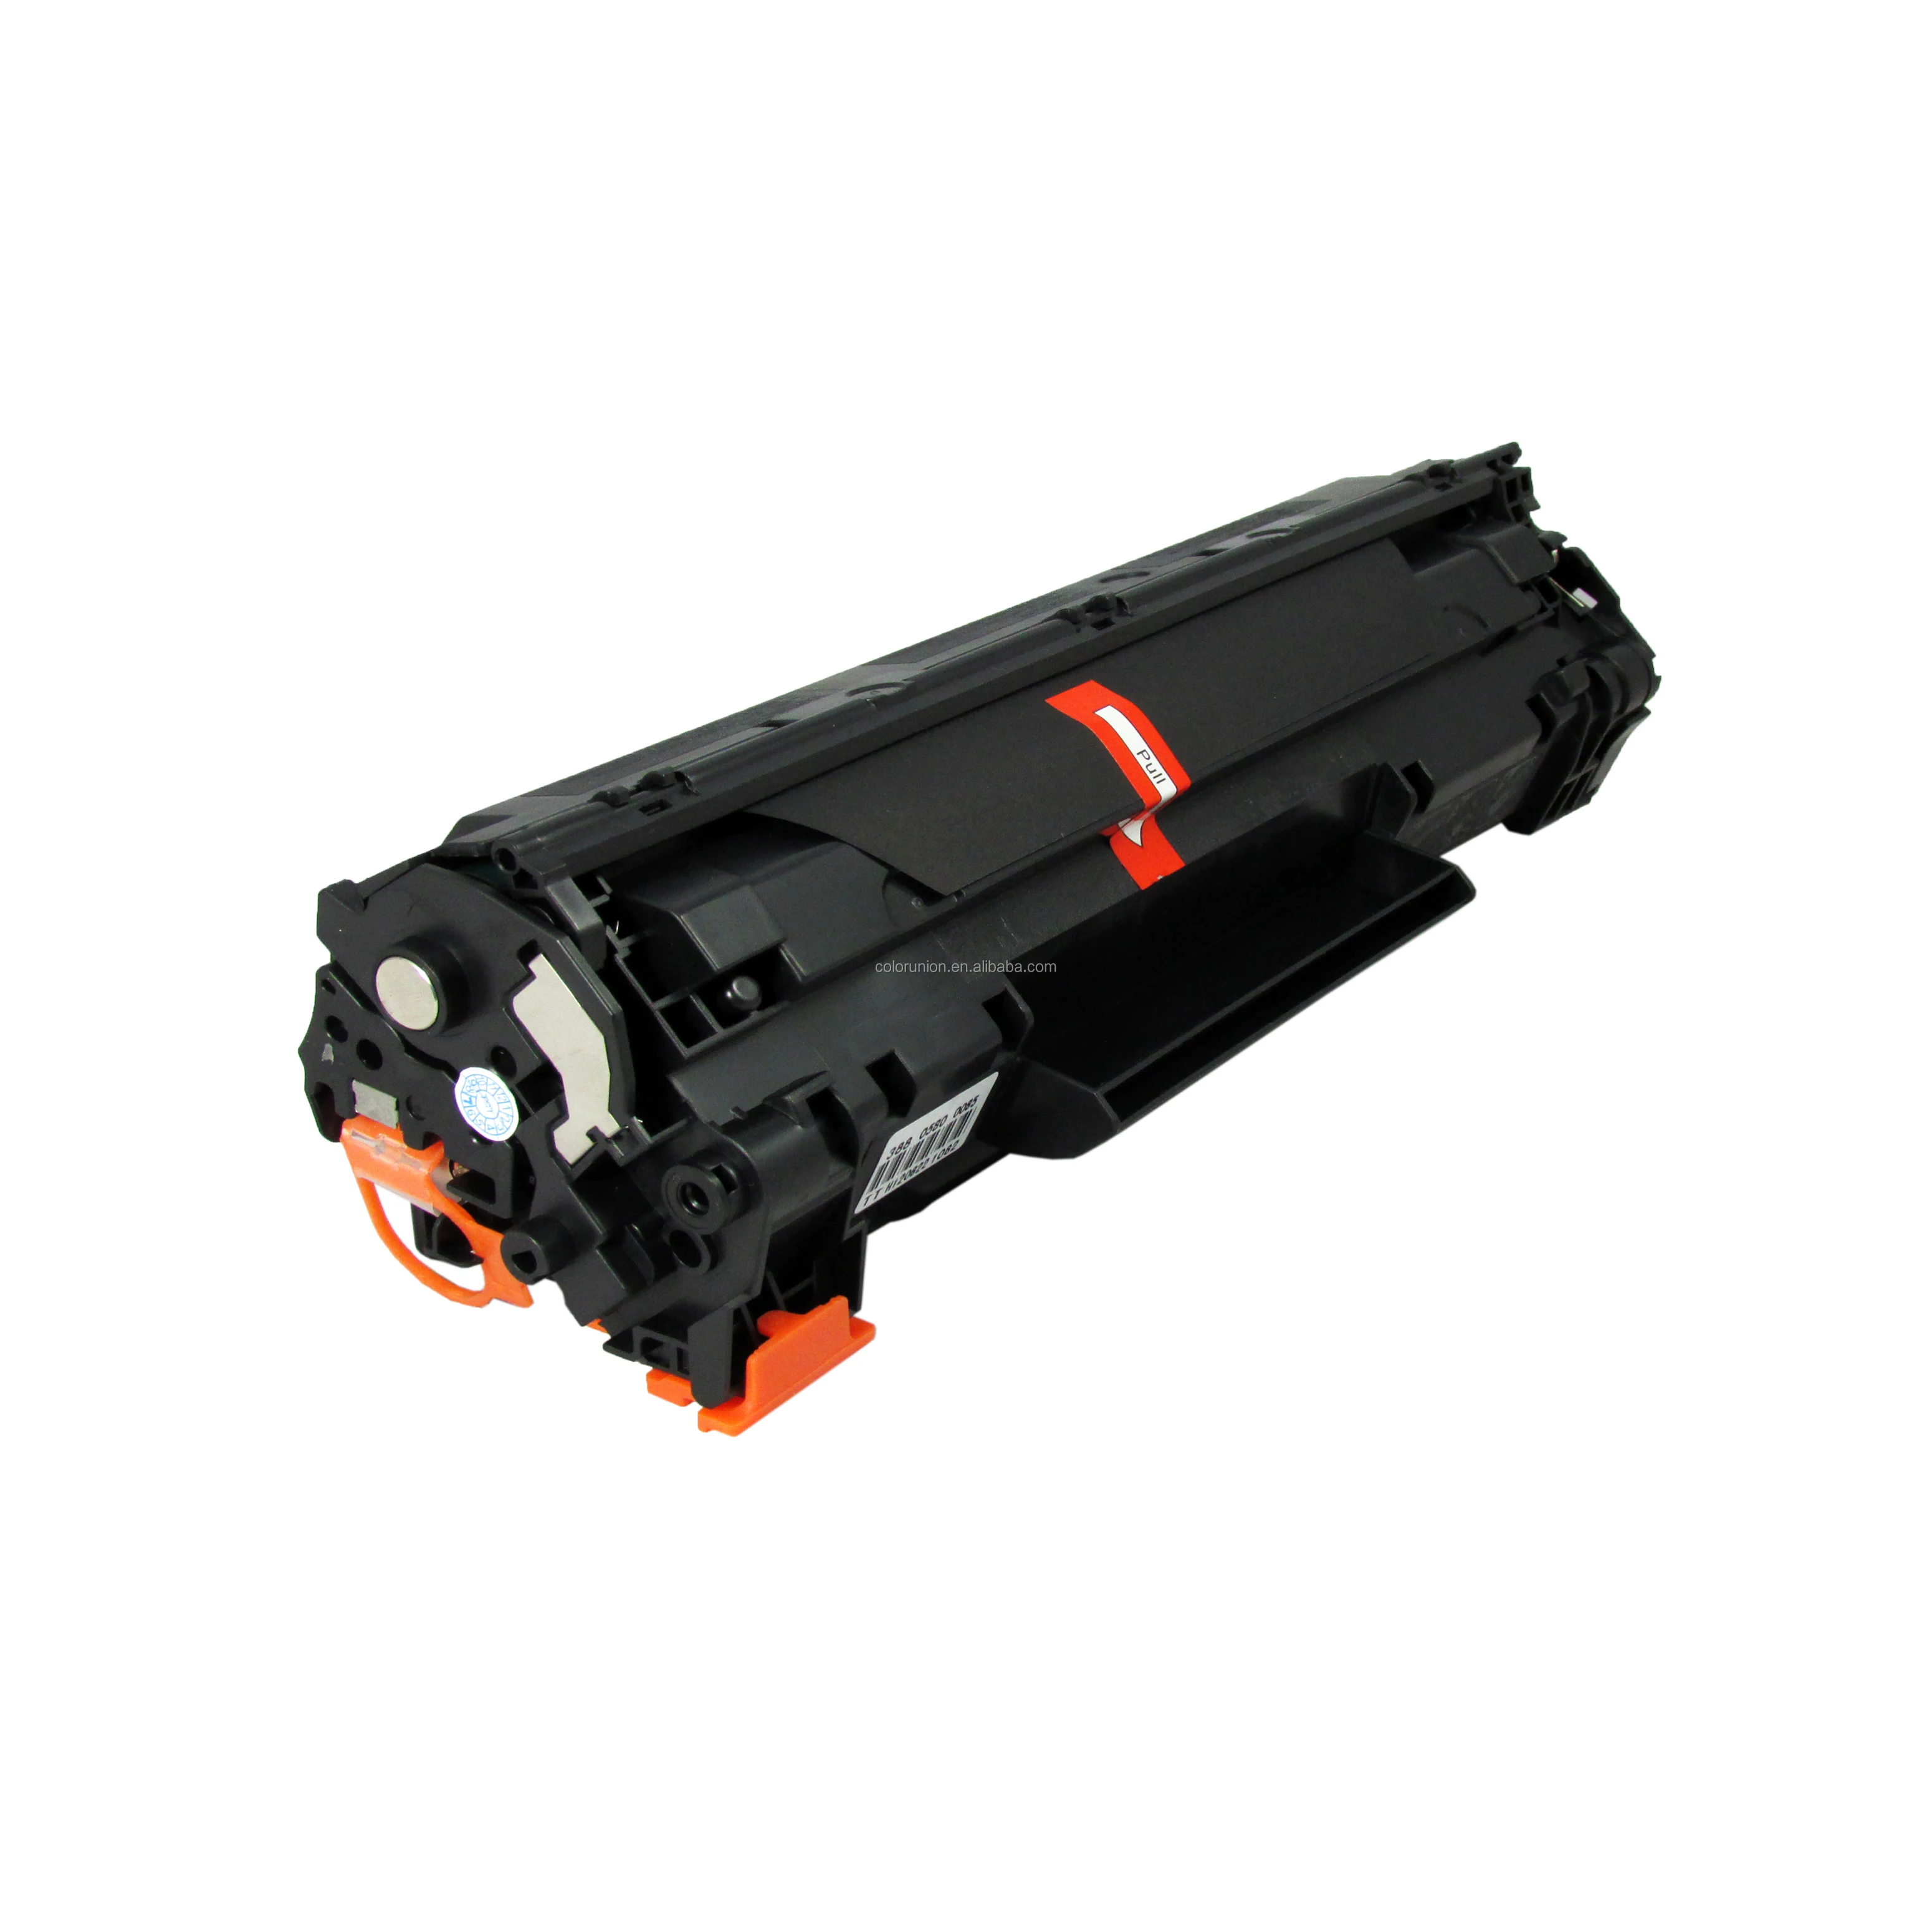 get USD500 coupon to compatible China premium  ink cartridges toner cartridges CC388A 88A for HP P1007/ P1008